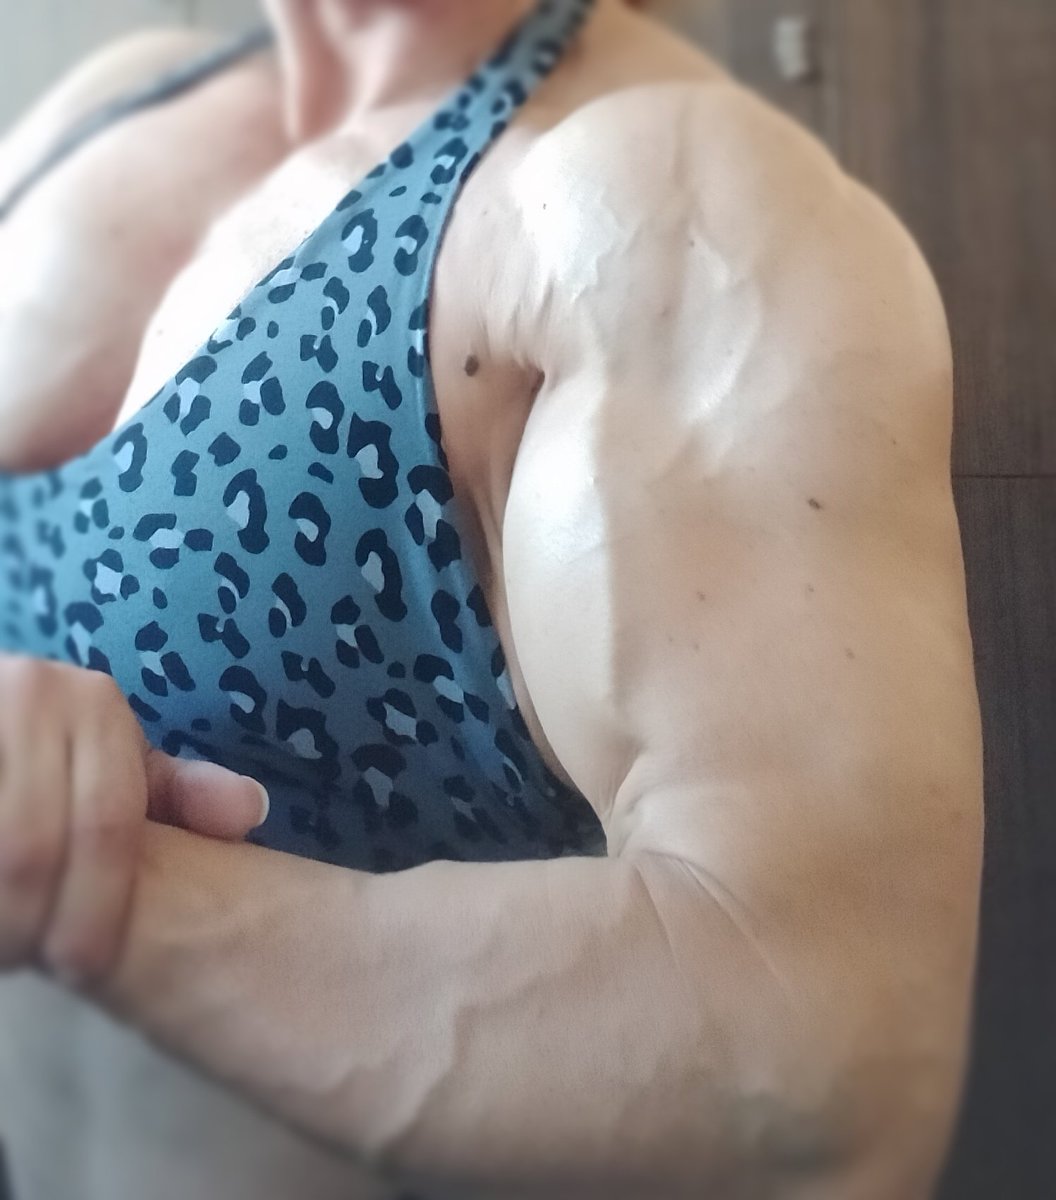 Buongiorno mondo 💪💪💪💪
#biceps #hugebiceps #hotmuscles #musclewoman #muscledom